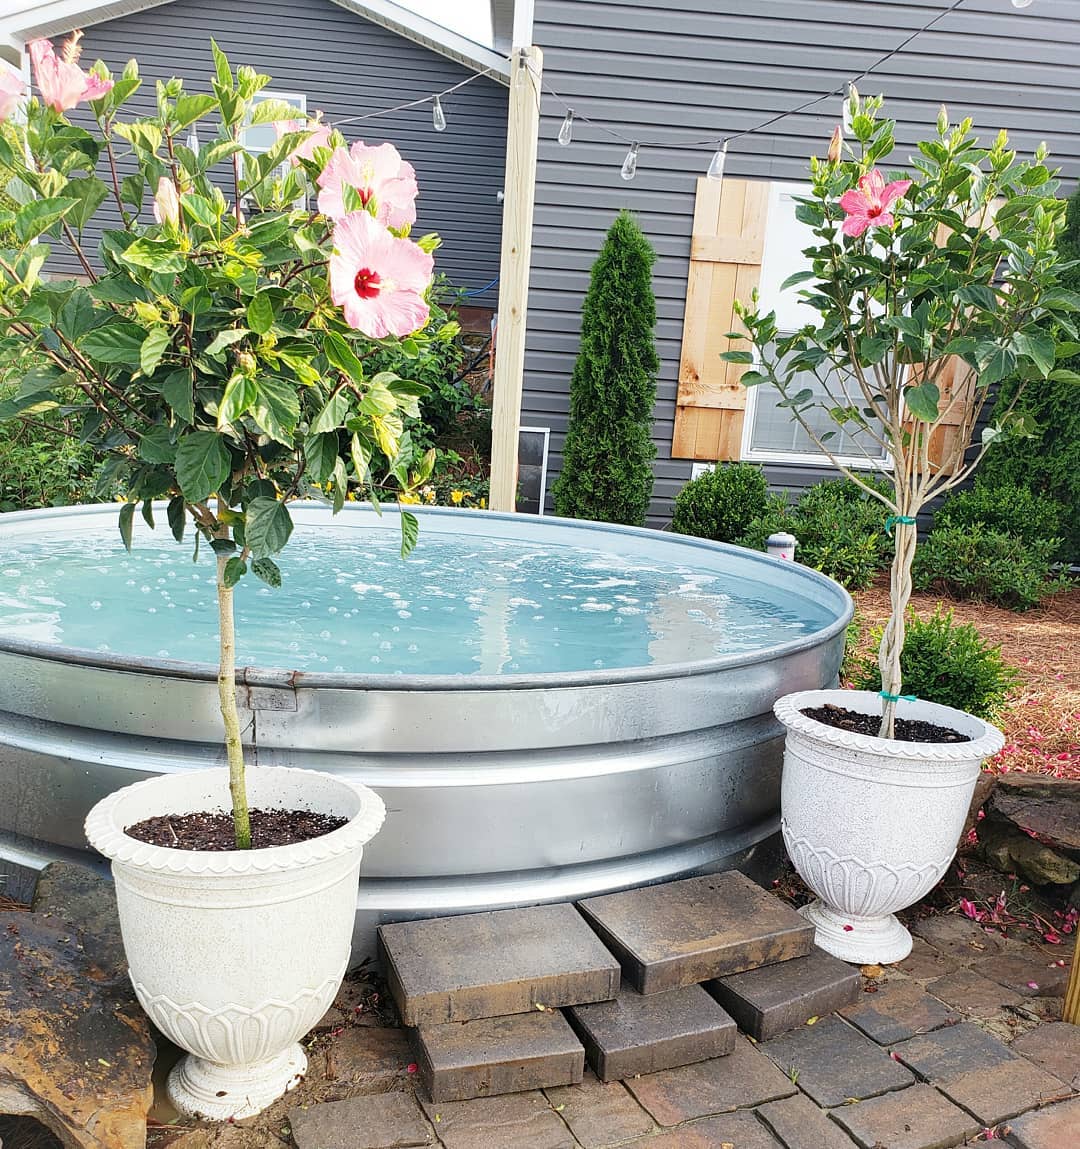 Silver stock pool surrounded by pink flowers. Photo by Instagram user @86andeverettedesignco